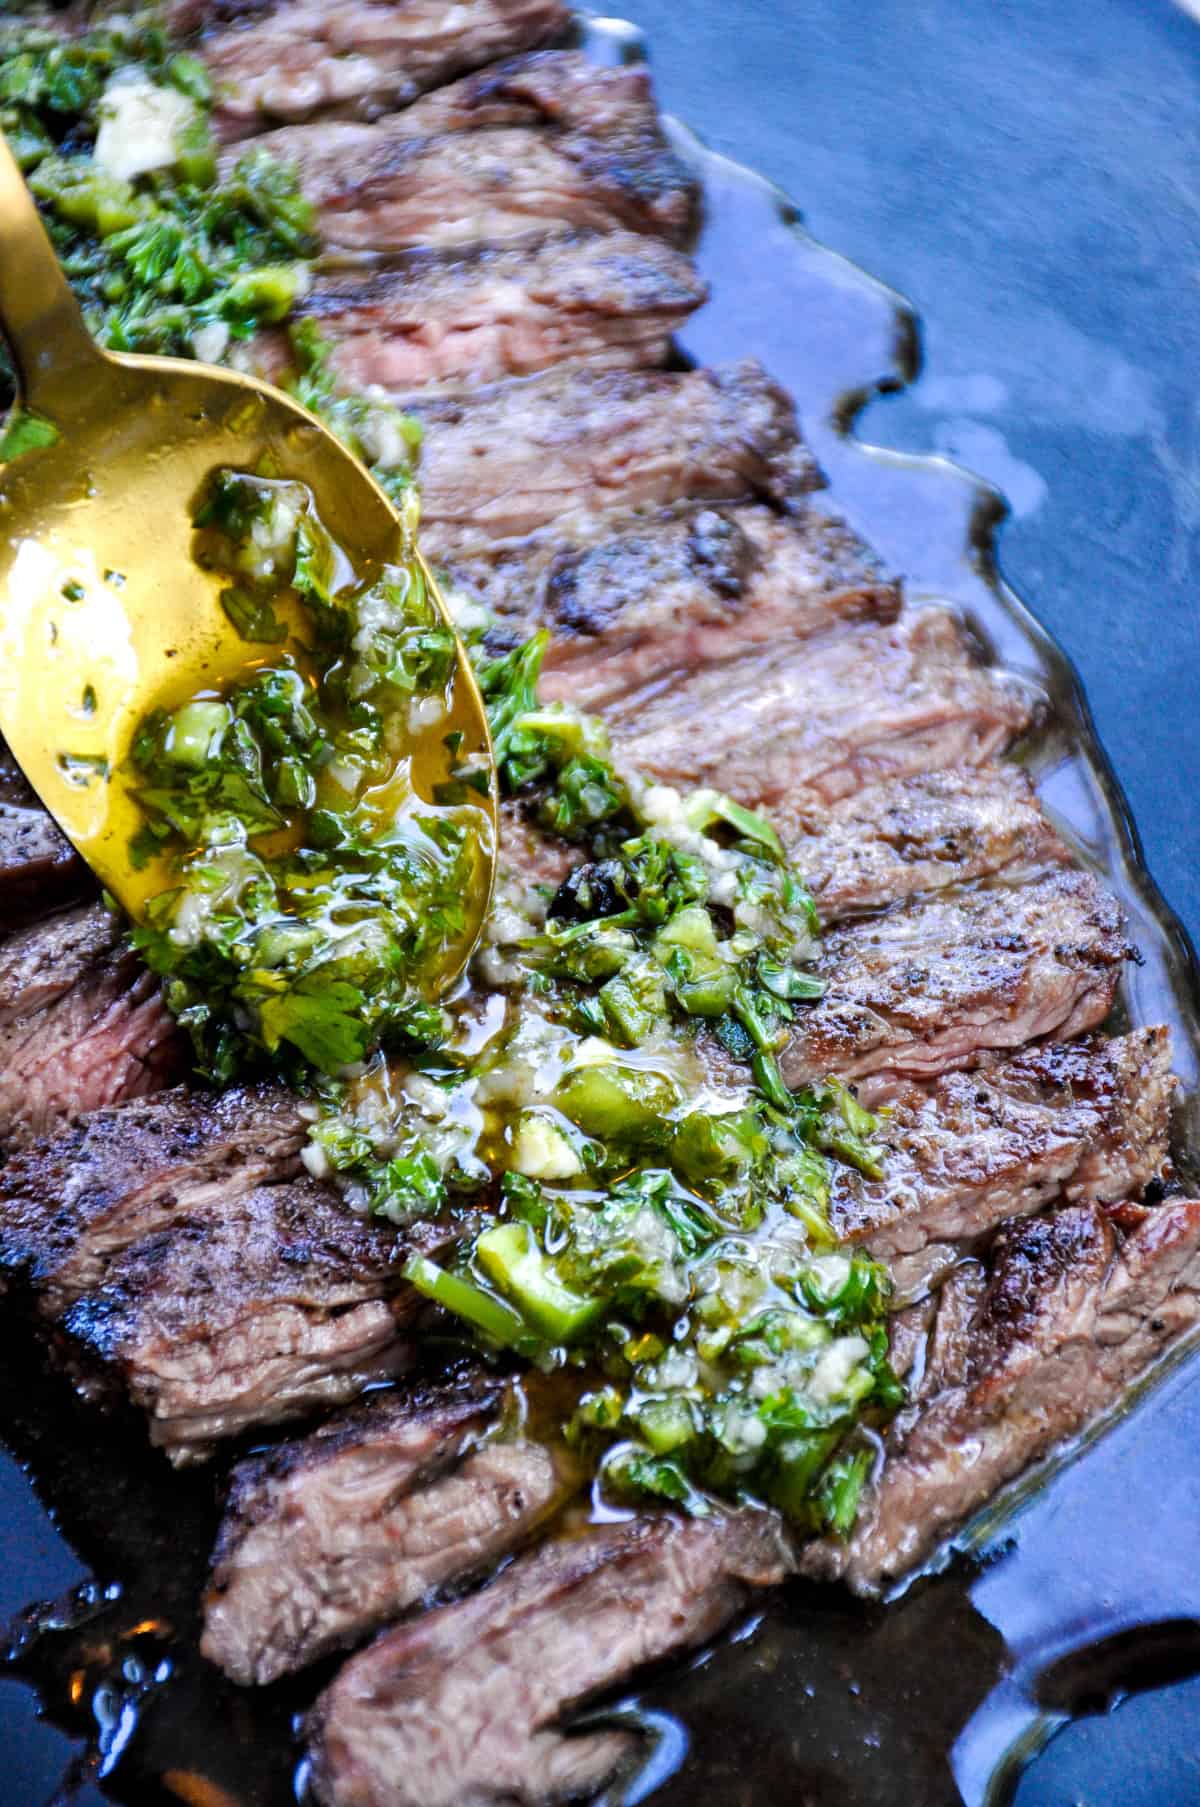 Reverse Marinade for your next steak. Full of flavor and fresh ingredients!